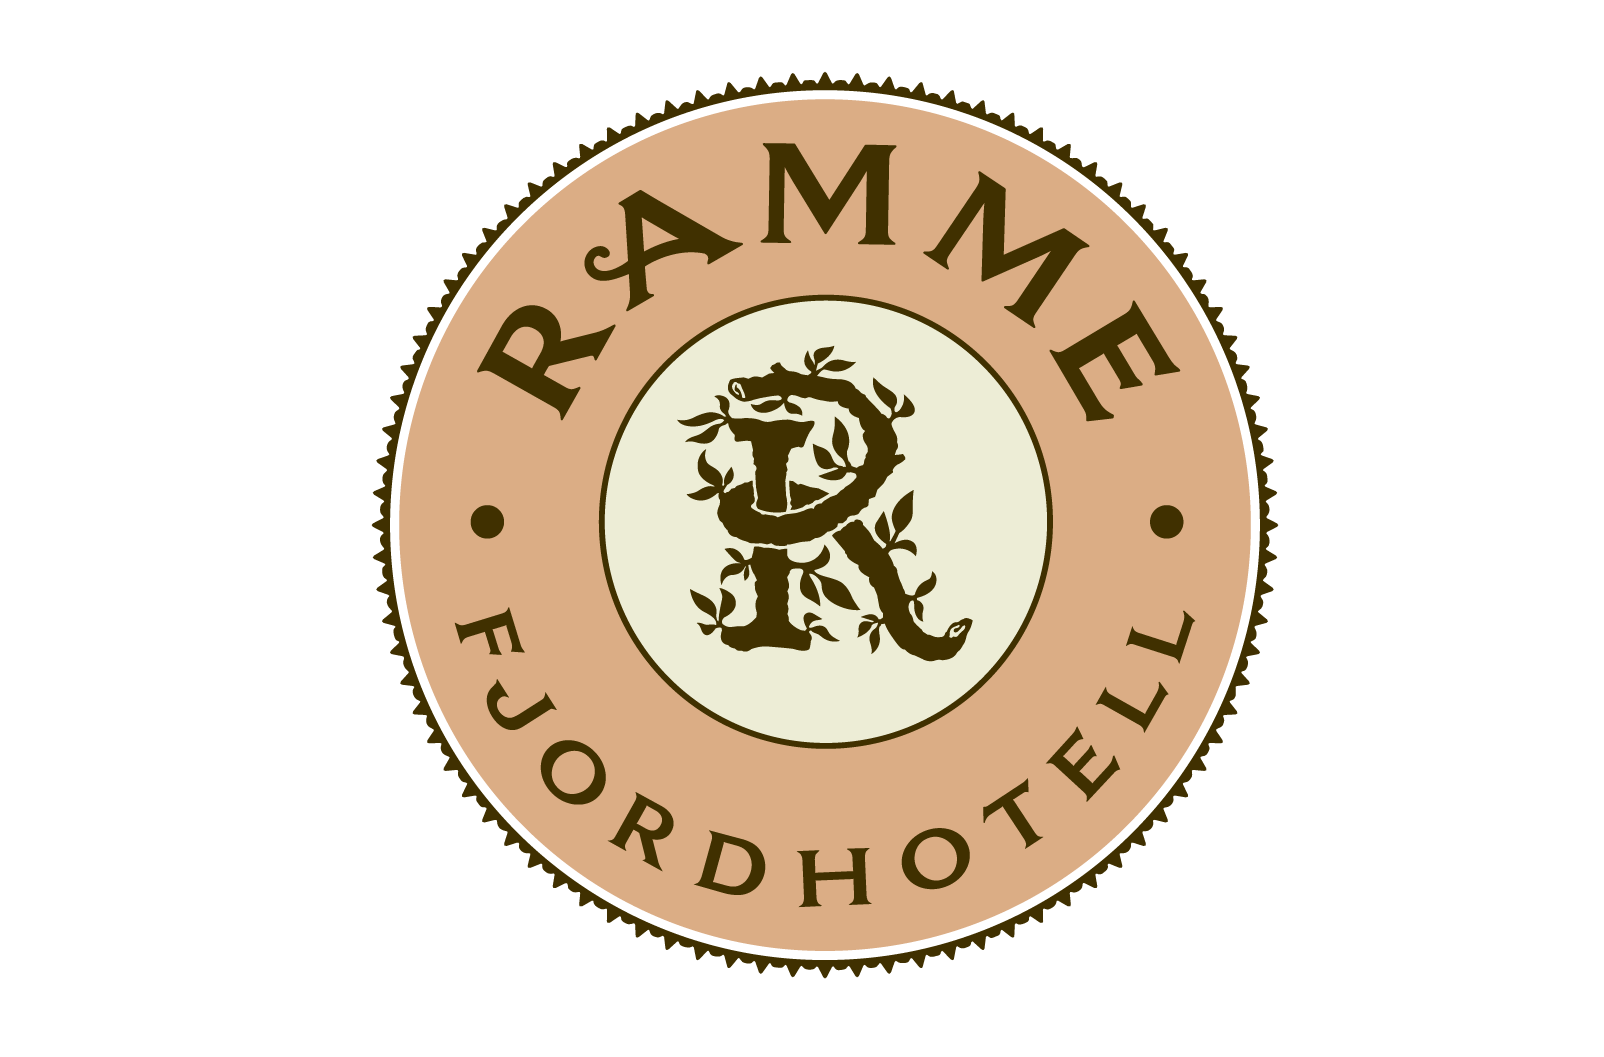 Ramme fjordhotell